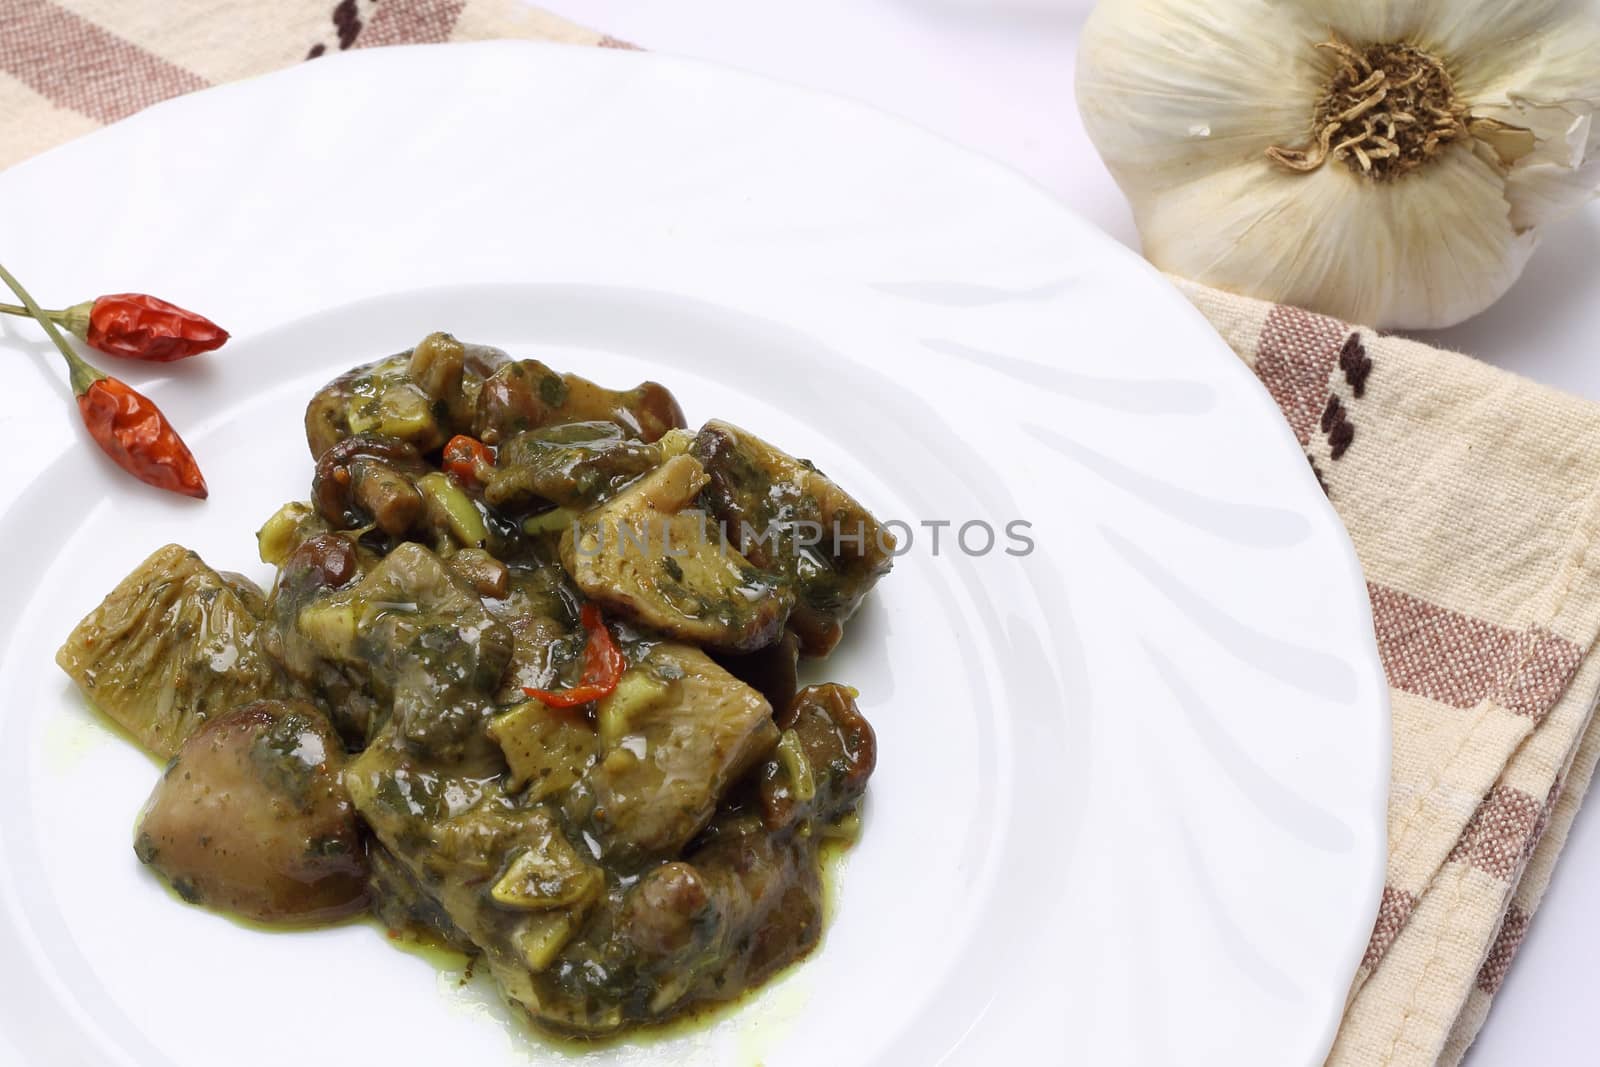 Mushrooms cooked with parsley and garlic